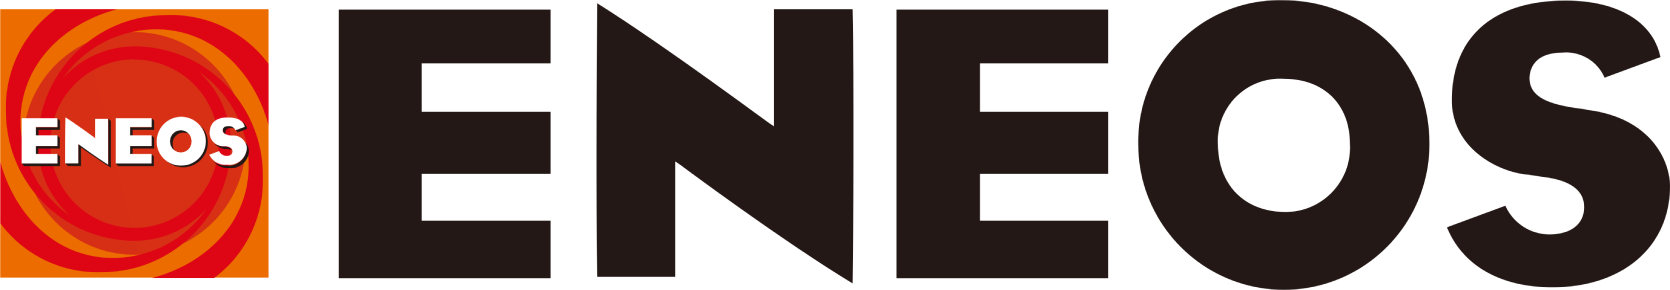 ENEOS Holdings logo large (transparent PNG)